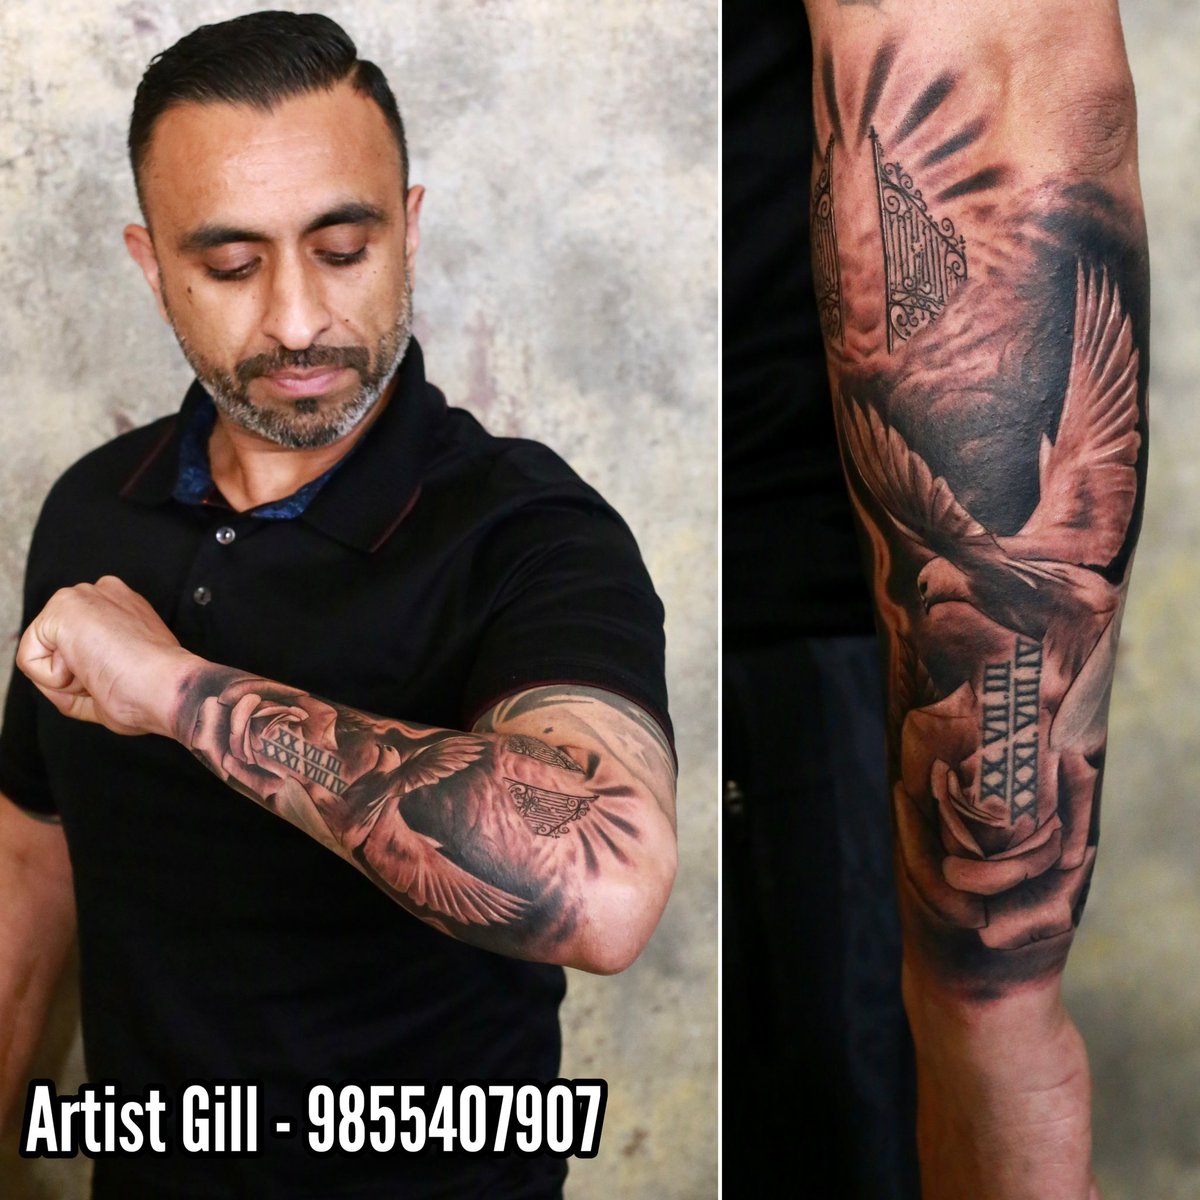 Sikh warrior and dragon full sleeve finished Thank you for the trust 🙏  DM/email @hstattoo29 to get yours started! 📍: @dutchmanta... | Instagram